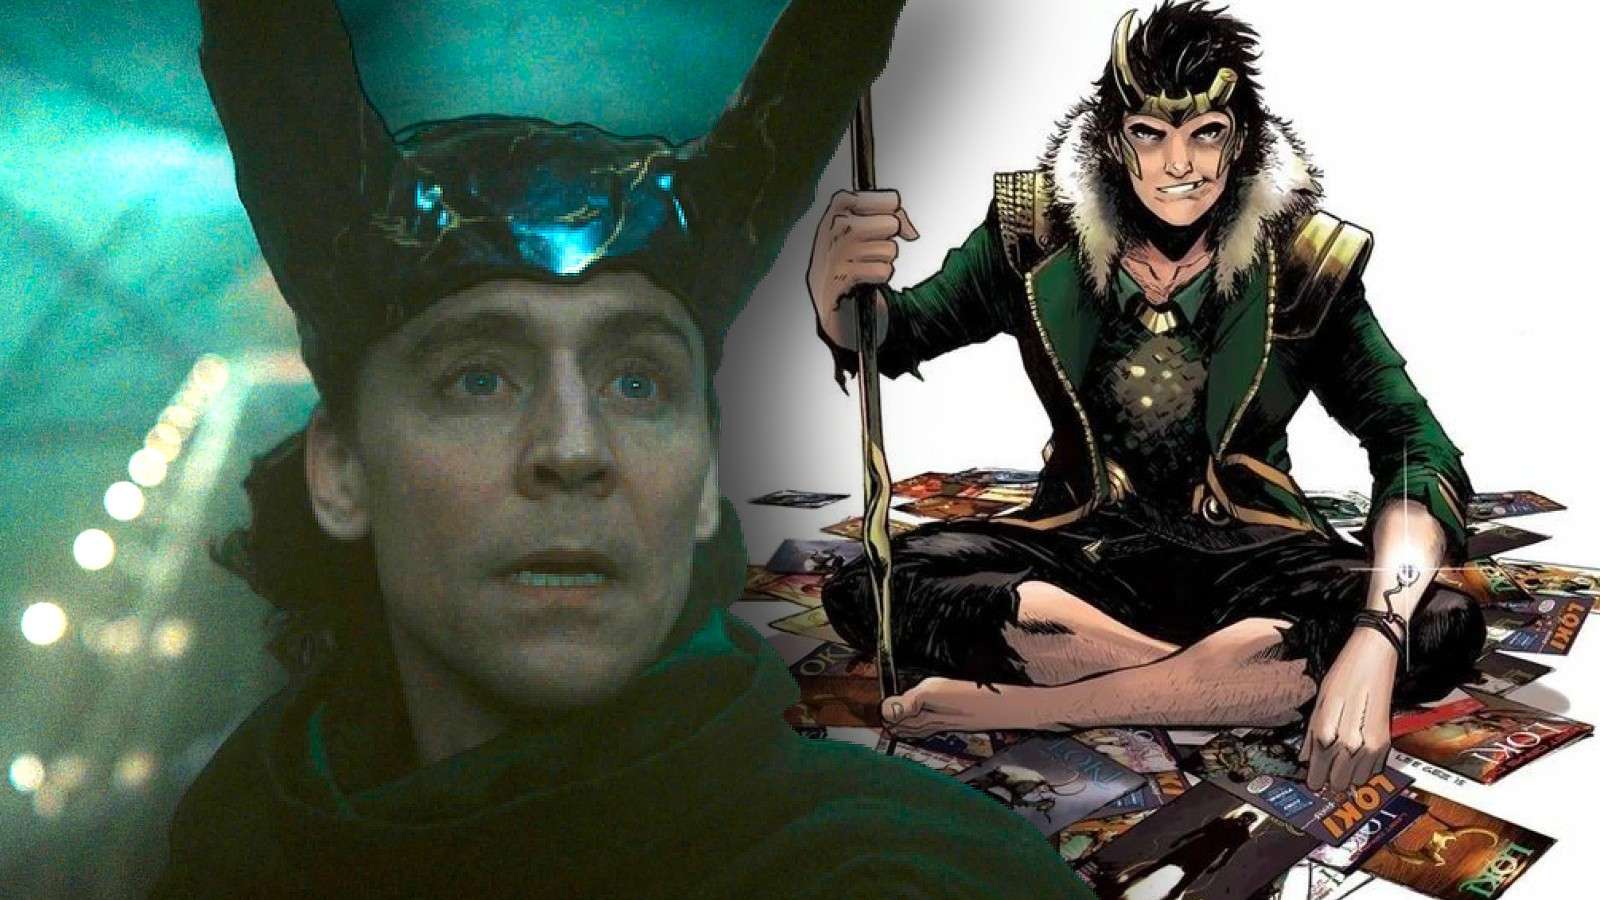 Tom Hiddleston as Loki and a still of the God of Stories in the comics